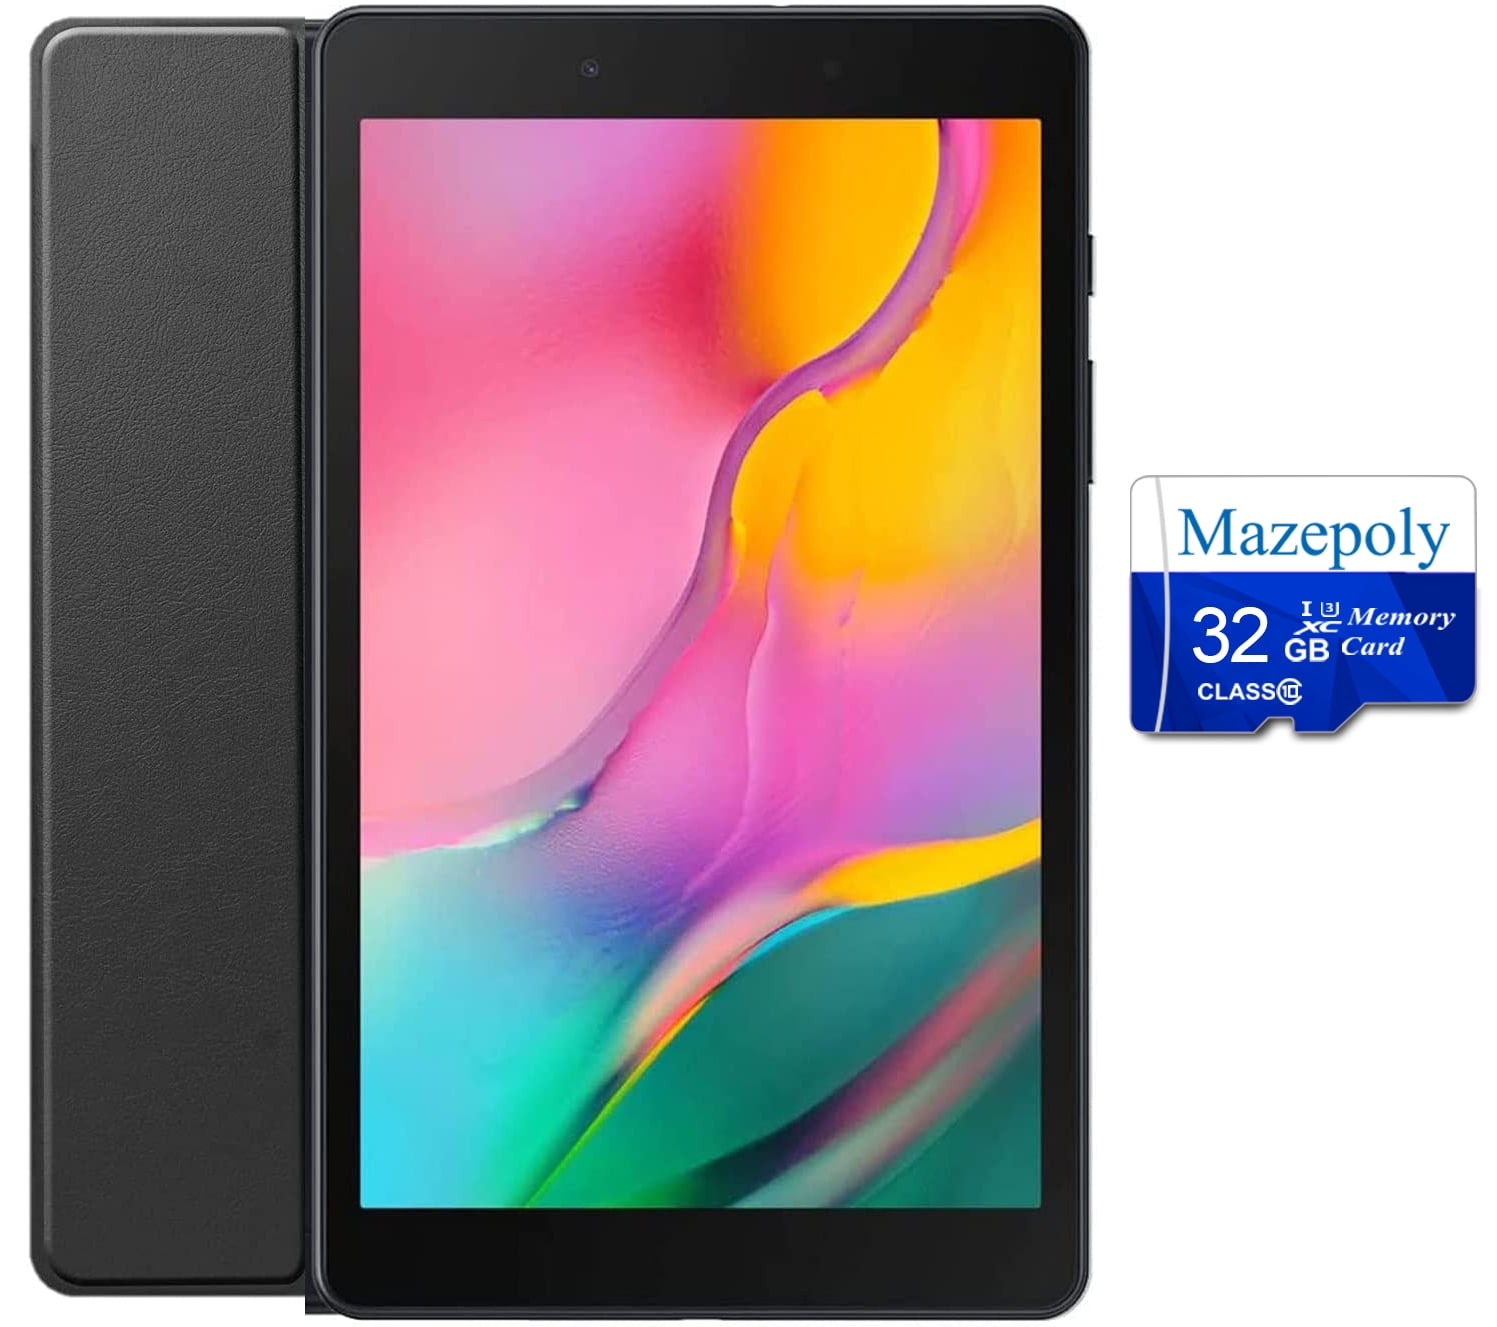 Estereotipo director cortar a tajos Samsung Galaxy Tab A 8.0-inch (2019 Version Newest) 32GB Touchscreen Tablet  Bundle, Quad-Core Qualcomm Snapdragon Processor, 2GB RAM, Android 9.0 OS  (WiFi, Black) with Mazepoly Accessories - Walmart.com